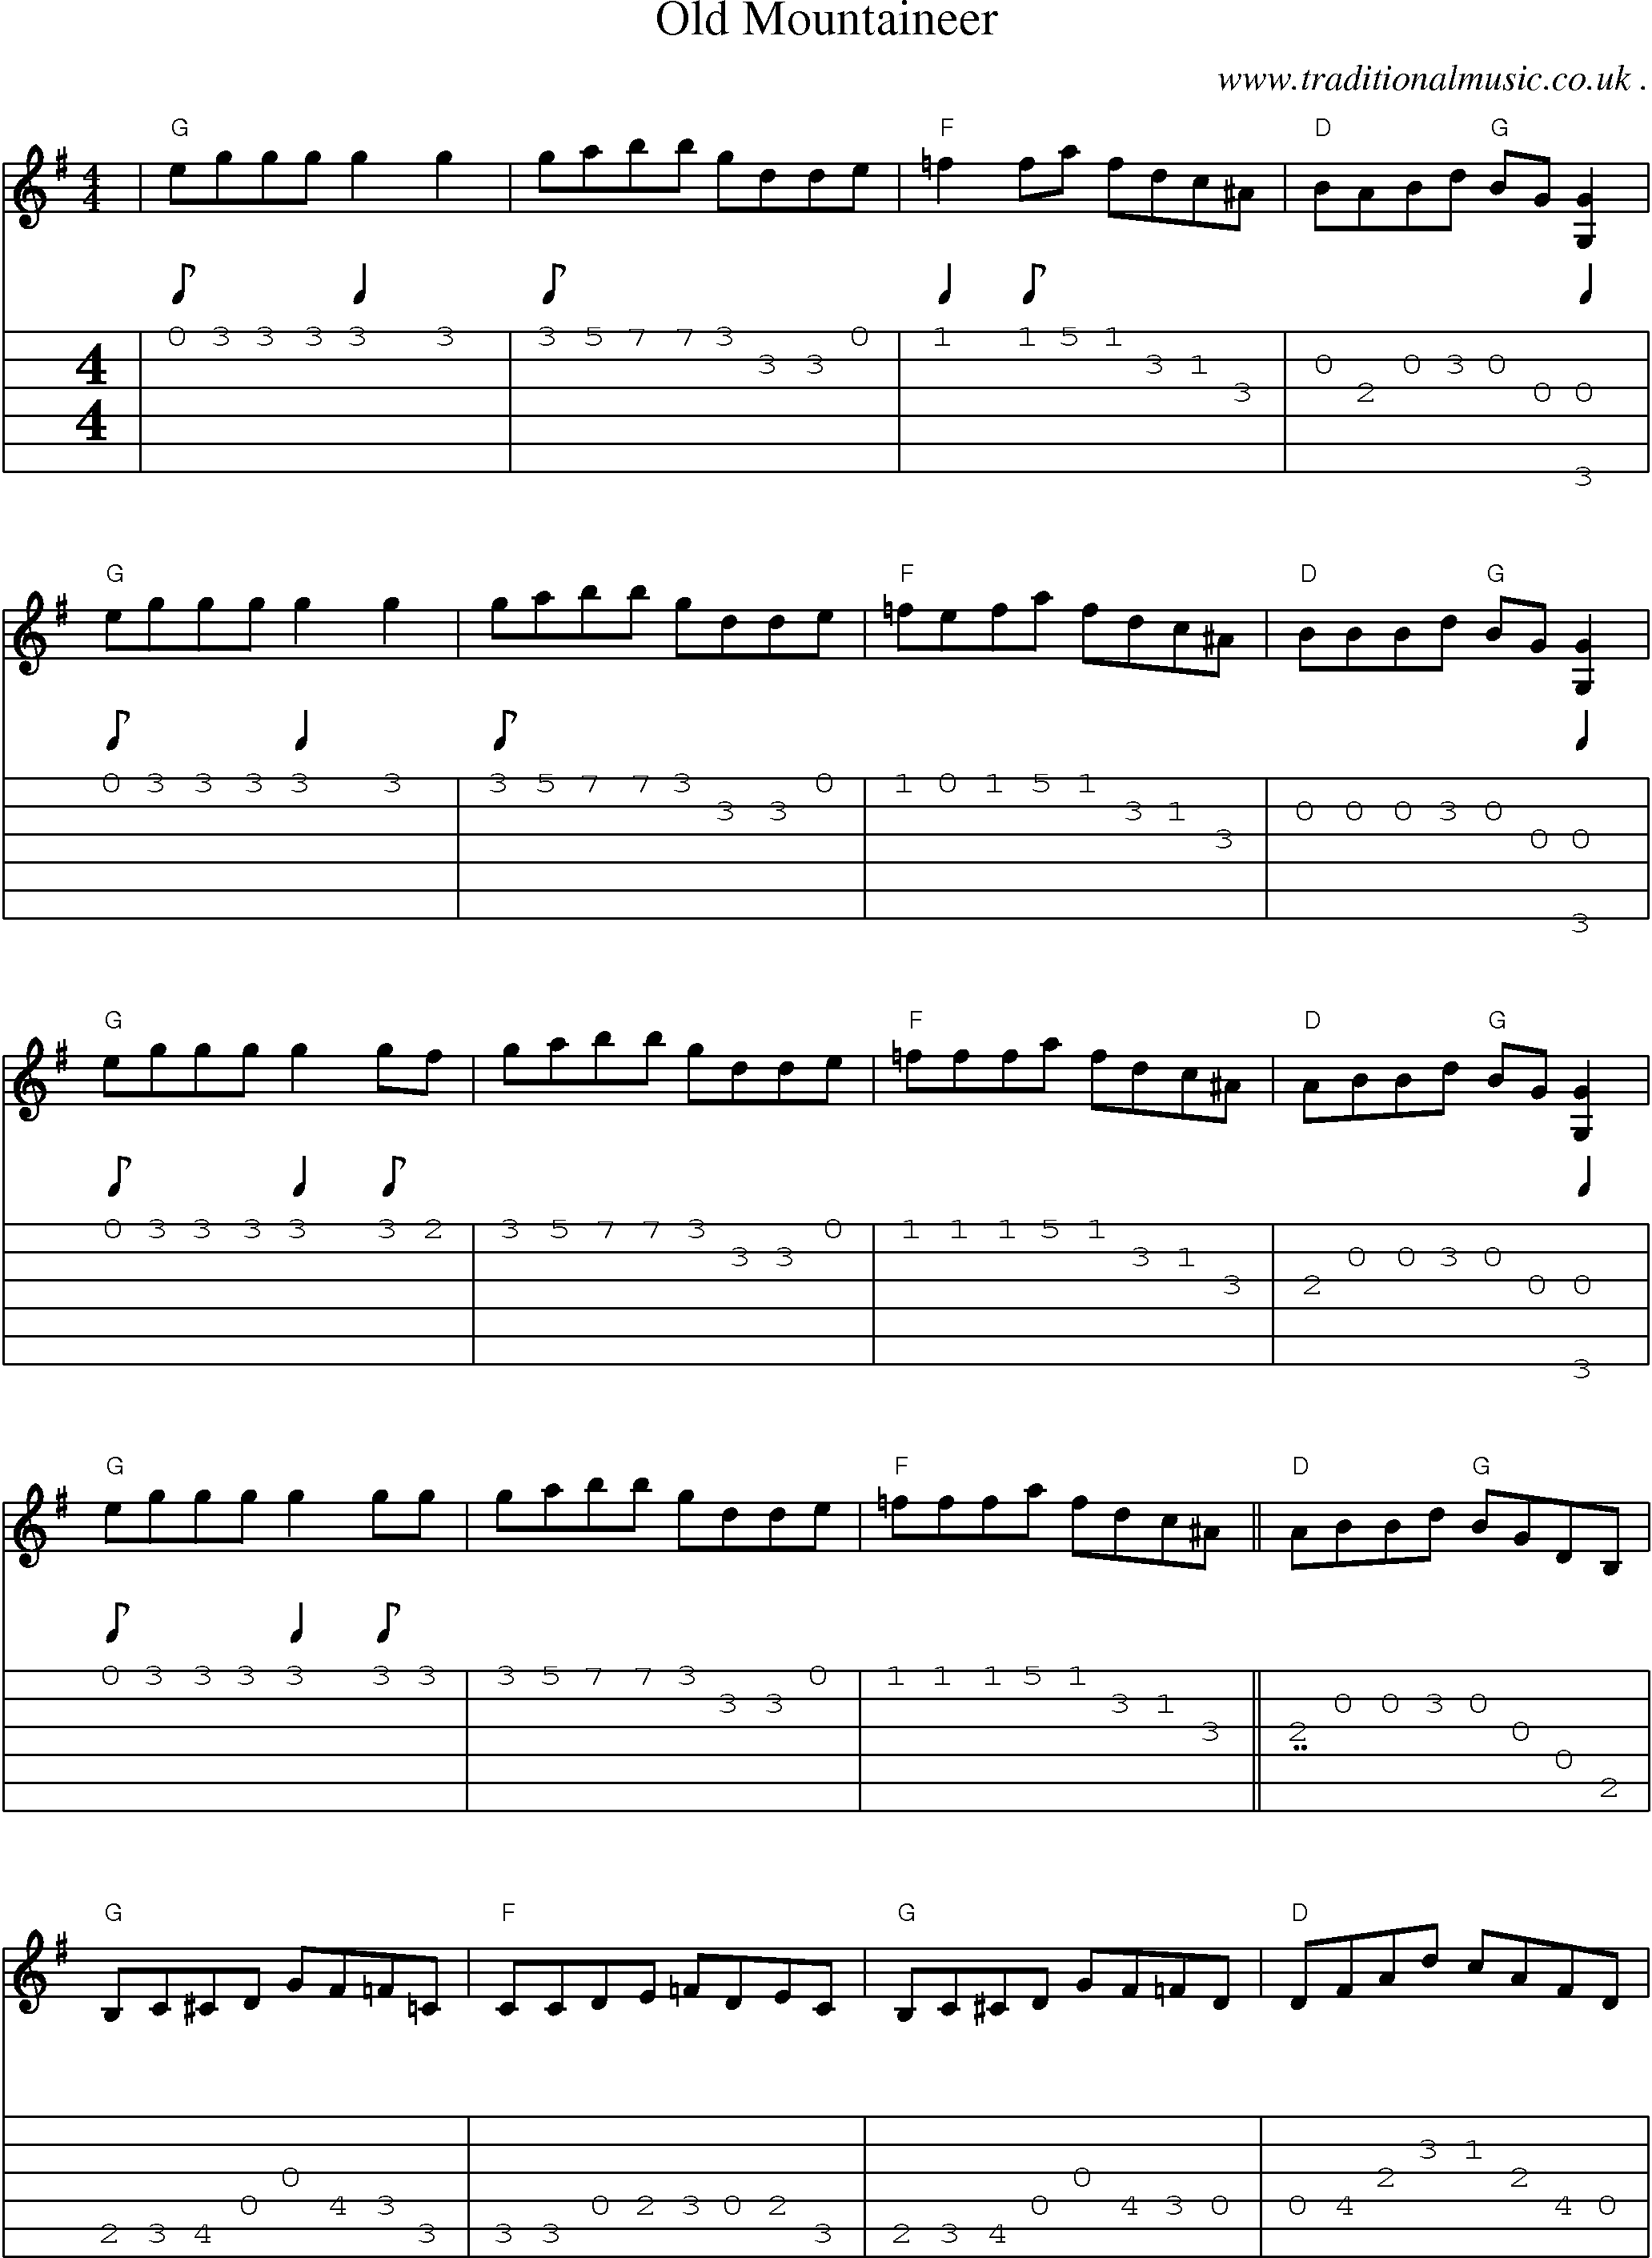 Music Score and Guitar Tabs for Old Mountaineer